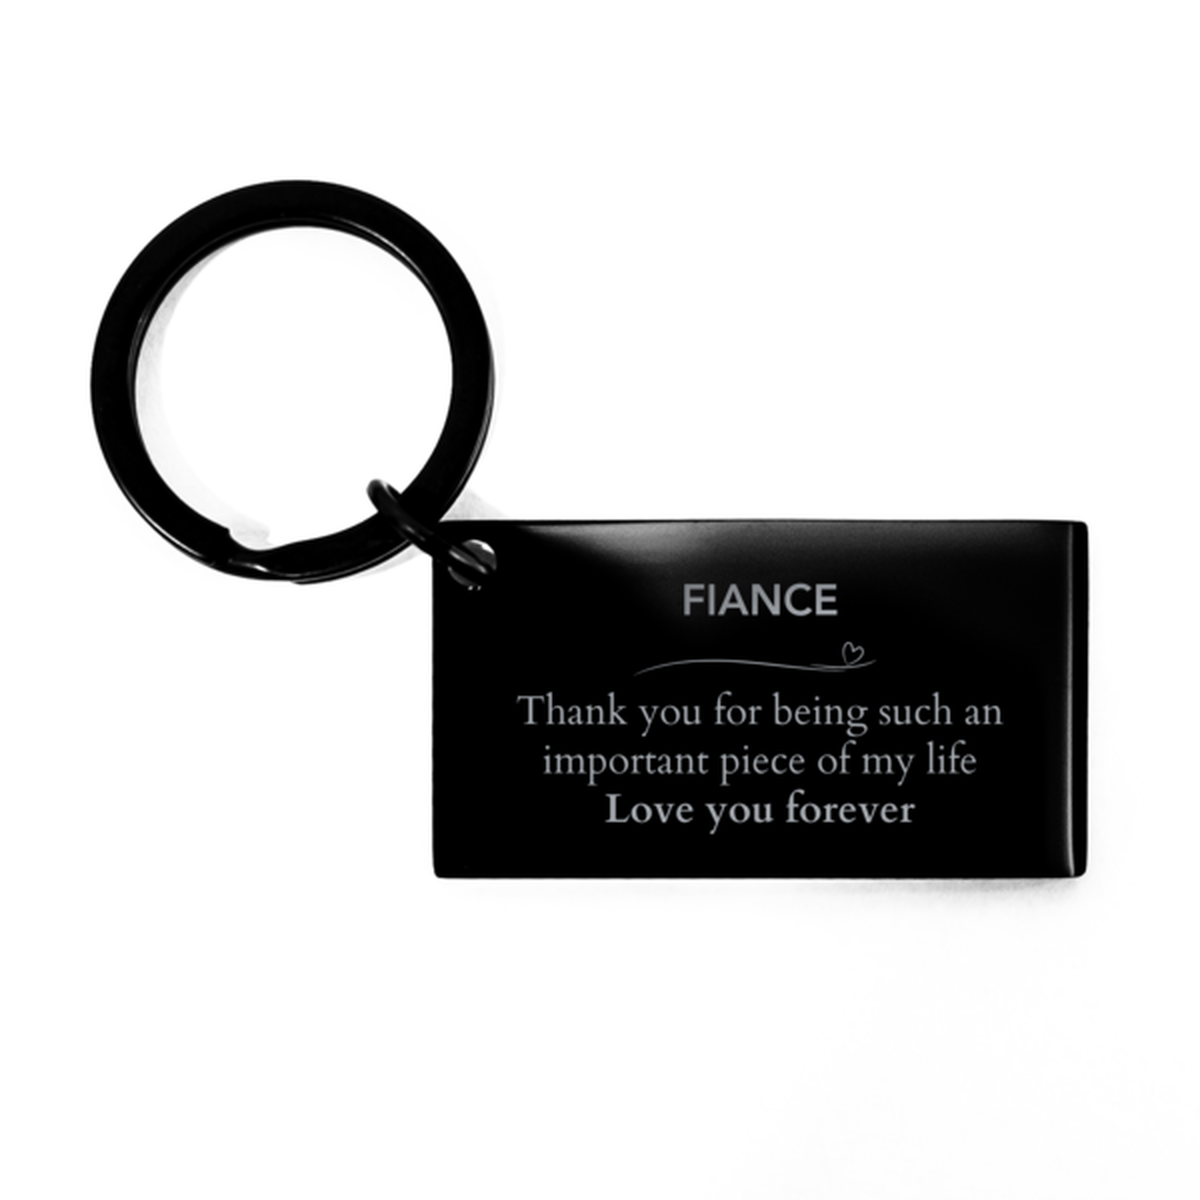 Appropriate Fiance Keychain Epic Birthday Gifts for Fiance Thank you for being such an important piece of my life Fiance Christmas Mothers Fathers Day